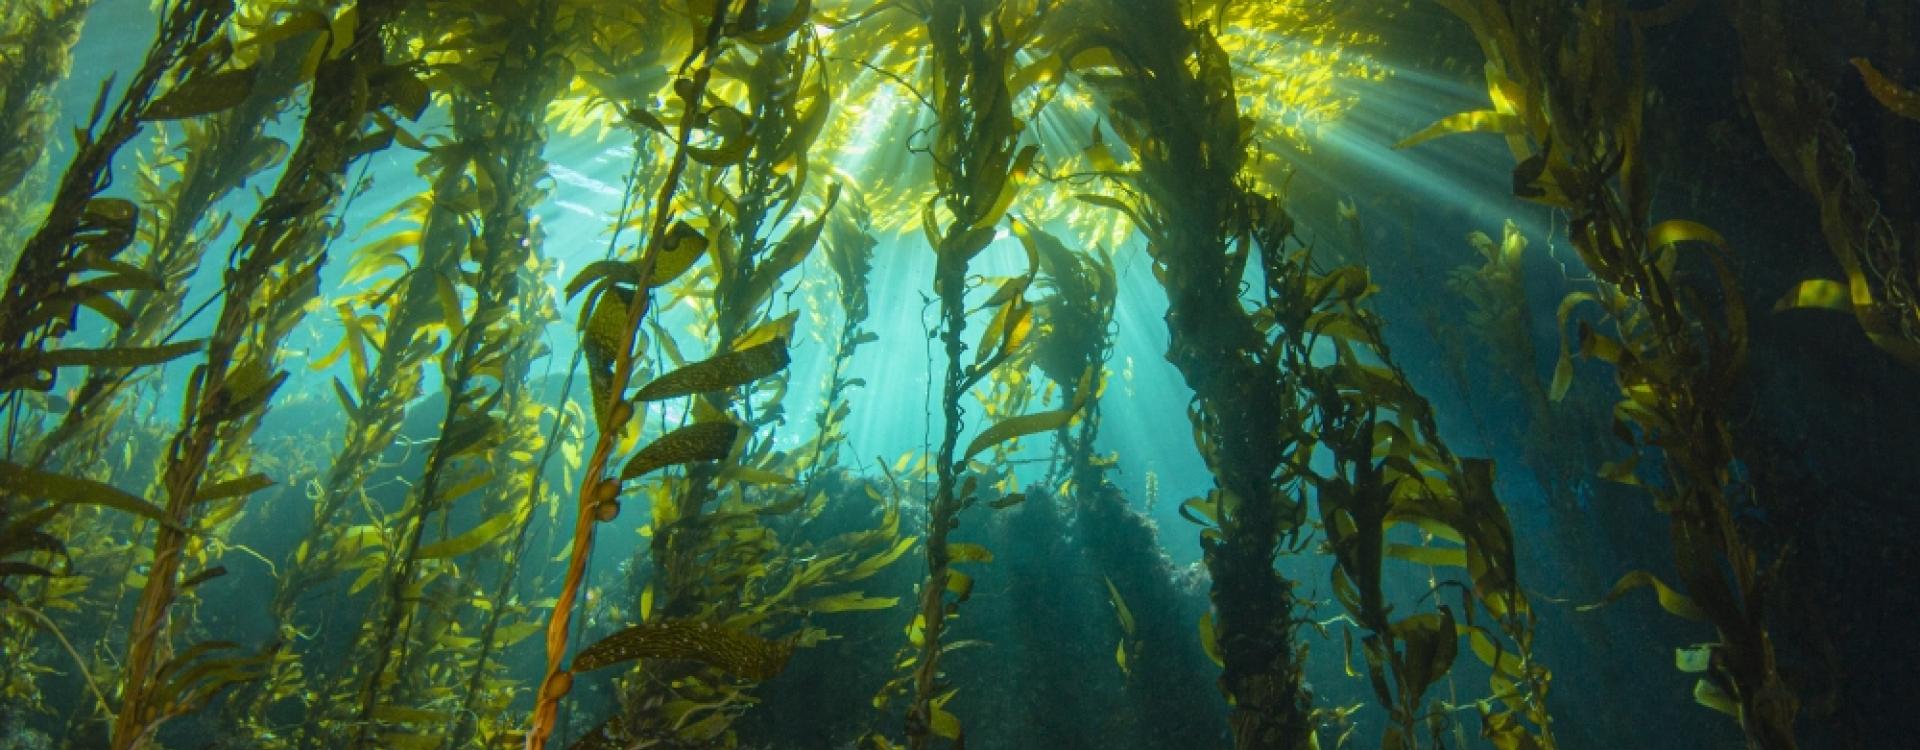 Sunlight filters down through a canopy of giant kelp